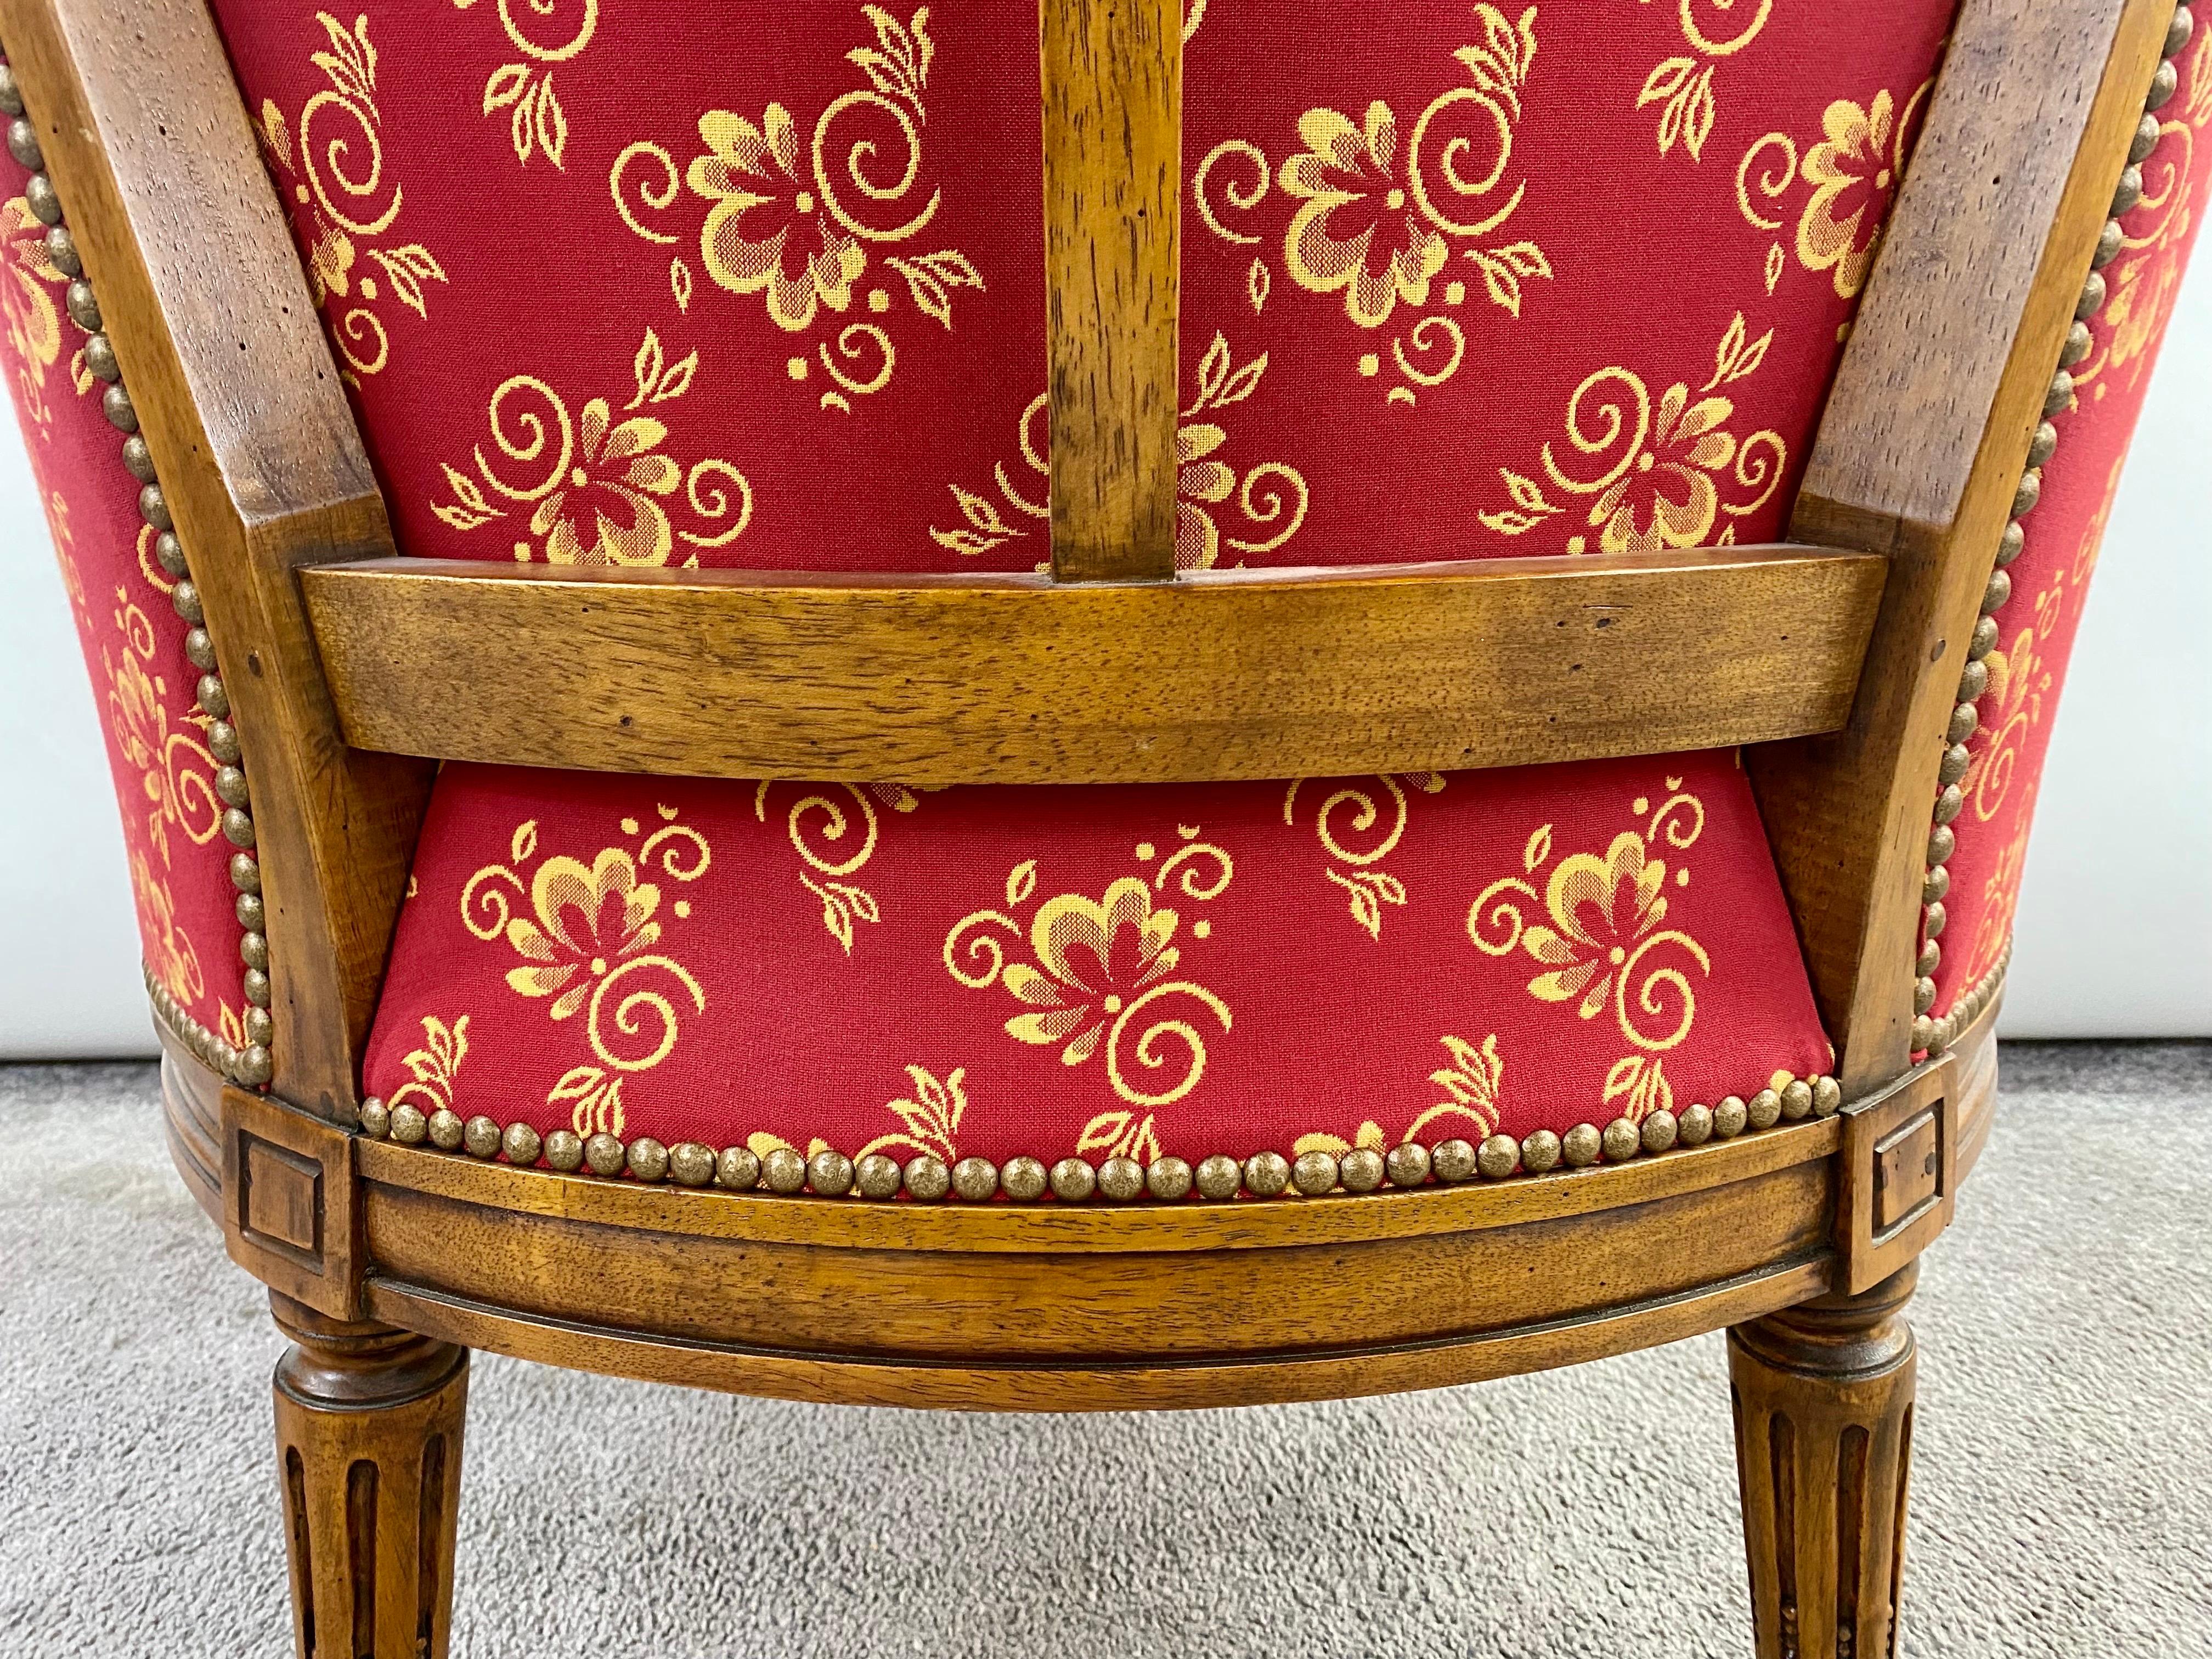 20th Century French Louis XVI Style Bergere Walnut Armchair in Red Upholstery, a Pair 